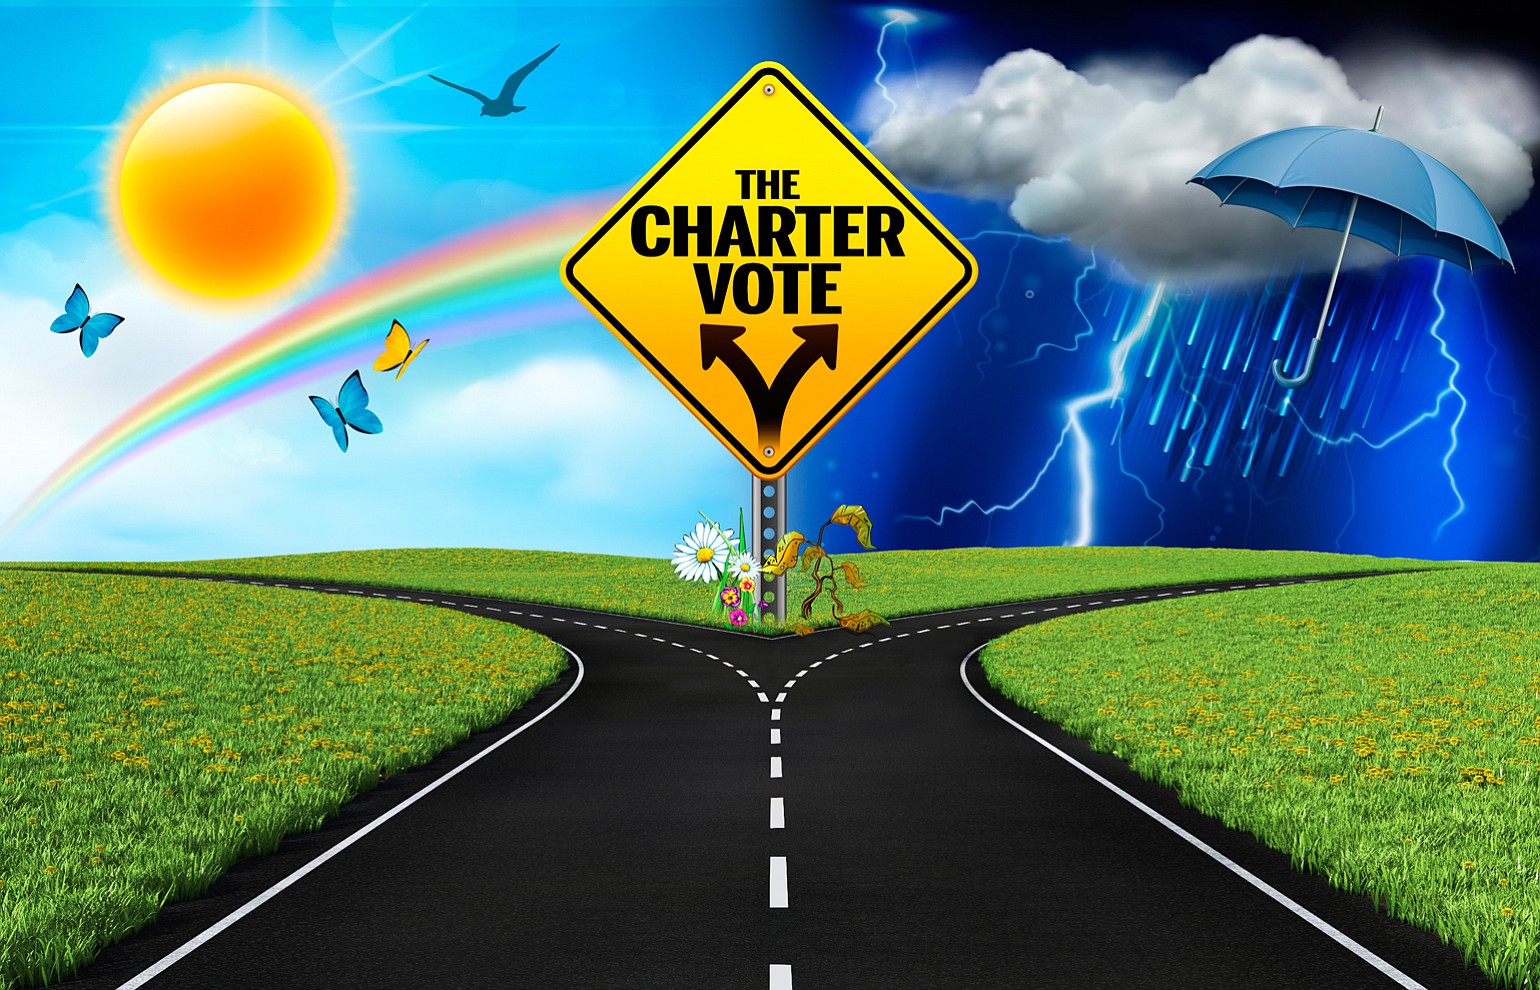 The upcoming charter won't likely be the difference between sunny and stormy days.